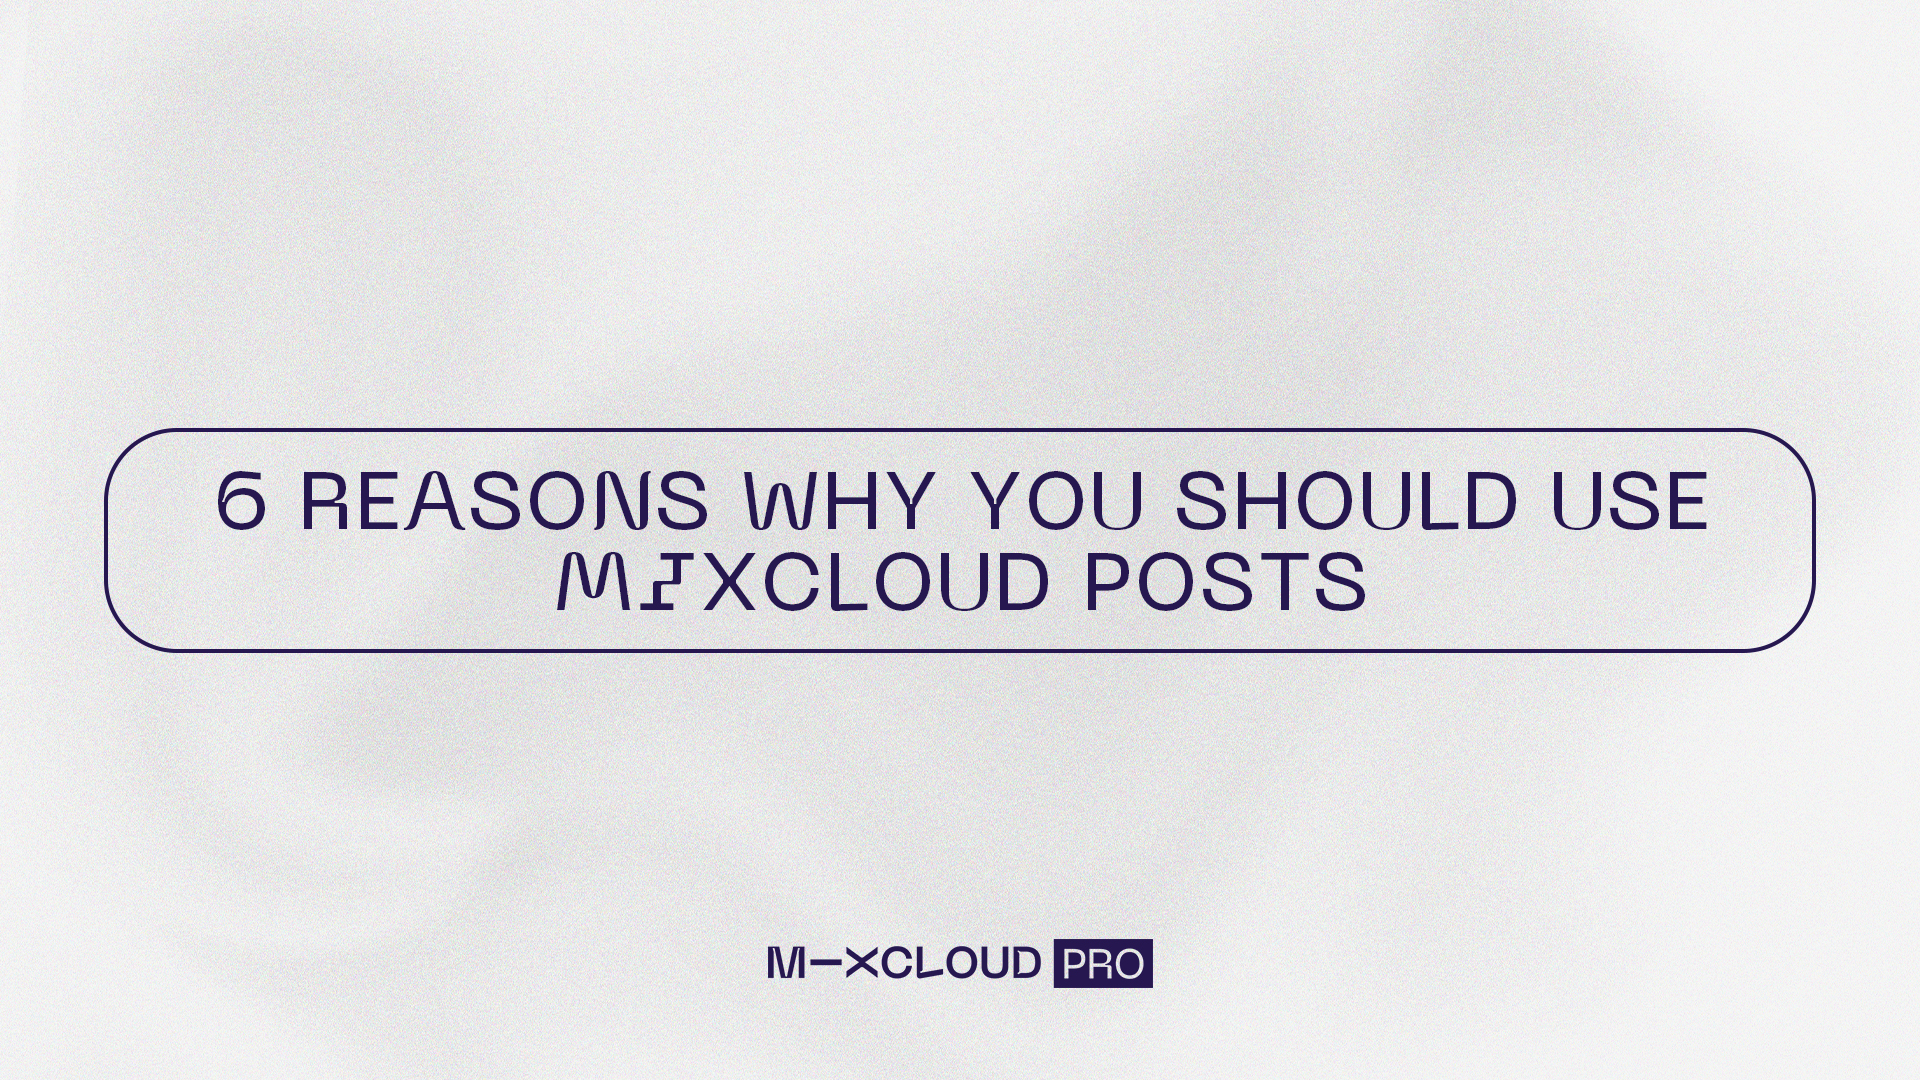 6 Reasons Why You Should Use Mixcloud Posts